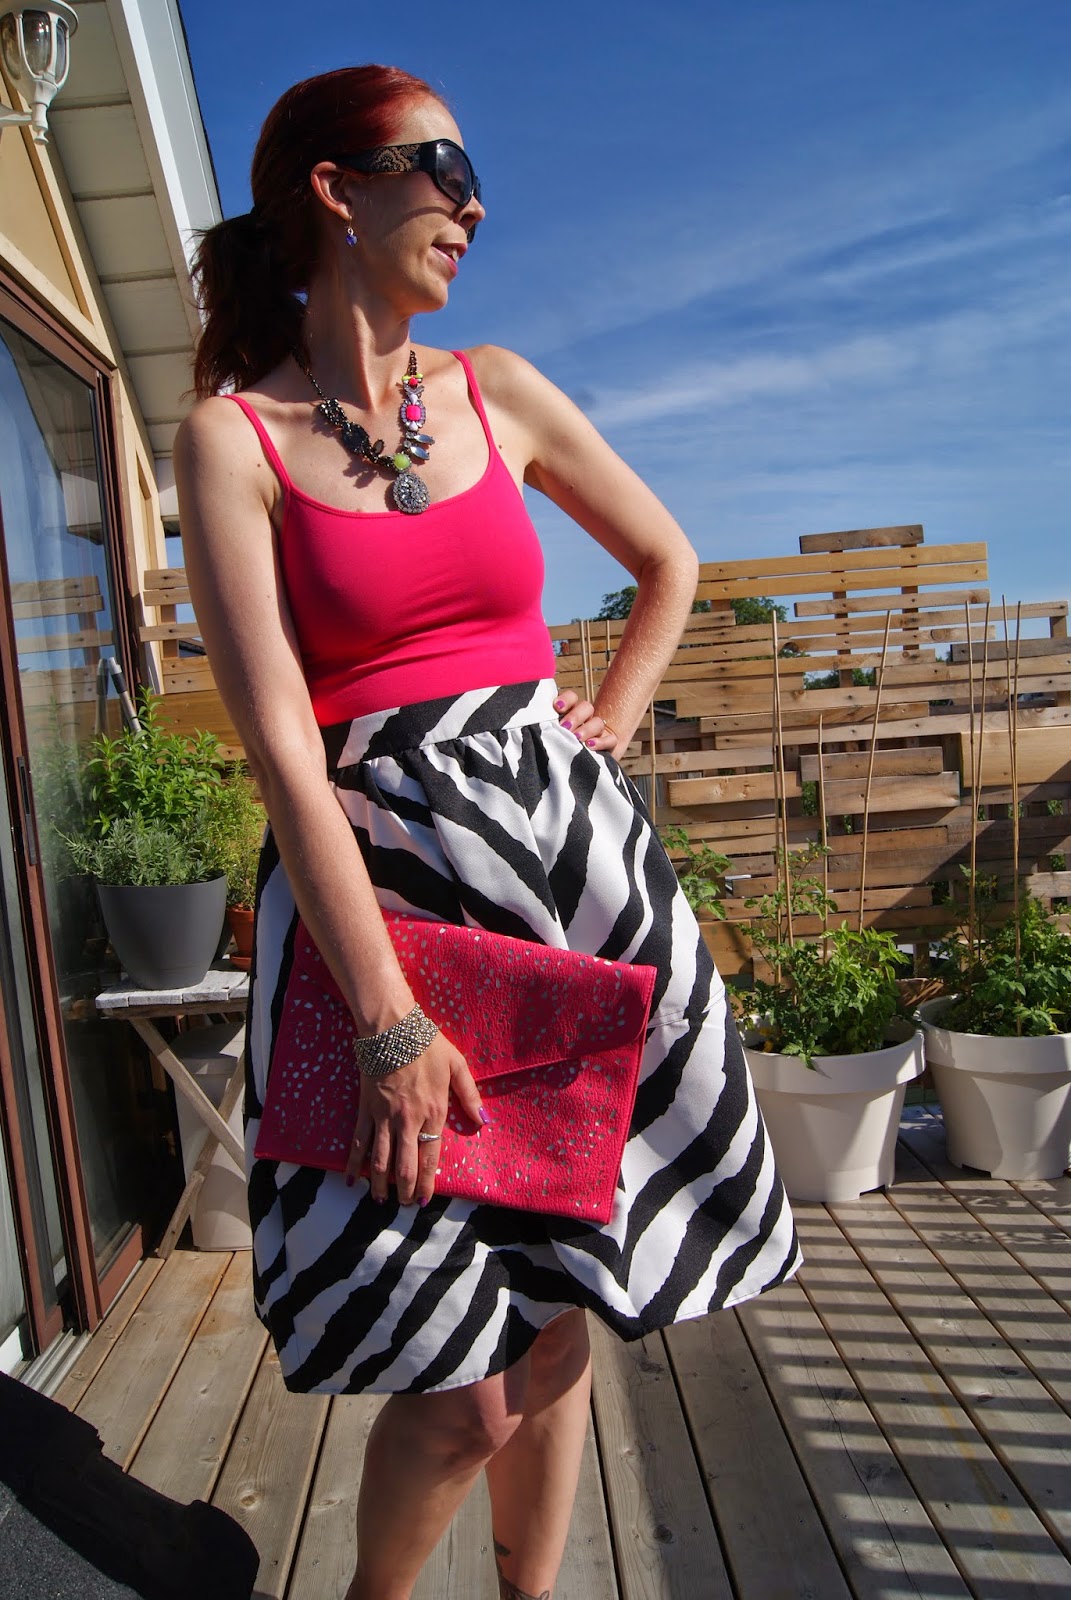 Zebra Print Lady, Express Full Skirt, tank top, Nine West Pink Shoes, Shop For Jayu Statement Necklace, Via by Vieta Clutch from Winners, Fashion, Style, Toronto, Ontario, Canada, Styletips, Melanie.Ps, The Purple Scarf, Pattern, Chic, Summer, Transional,Outfit, Accessories, Pretty, Fabfound